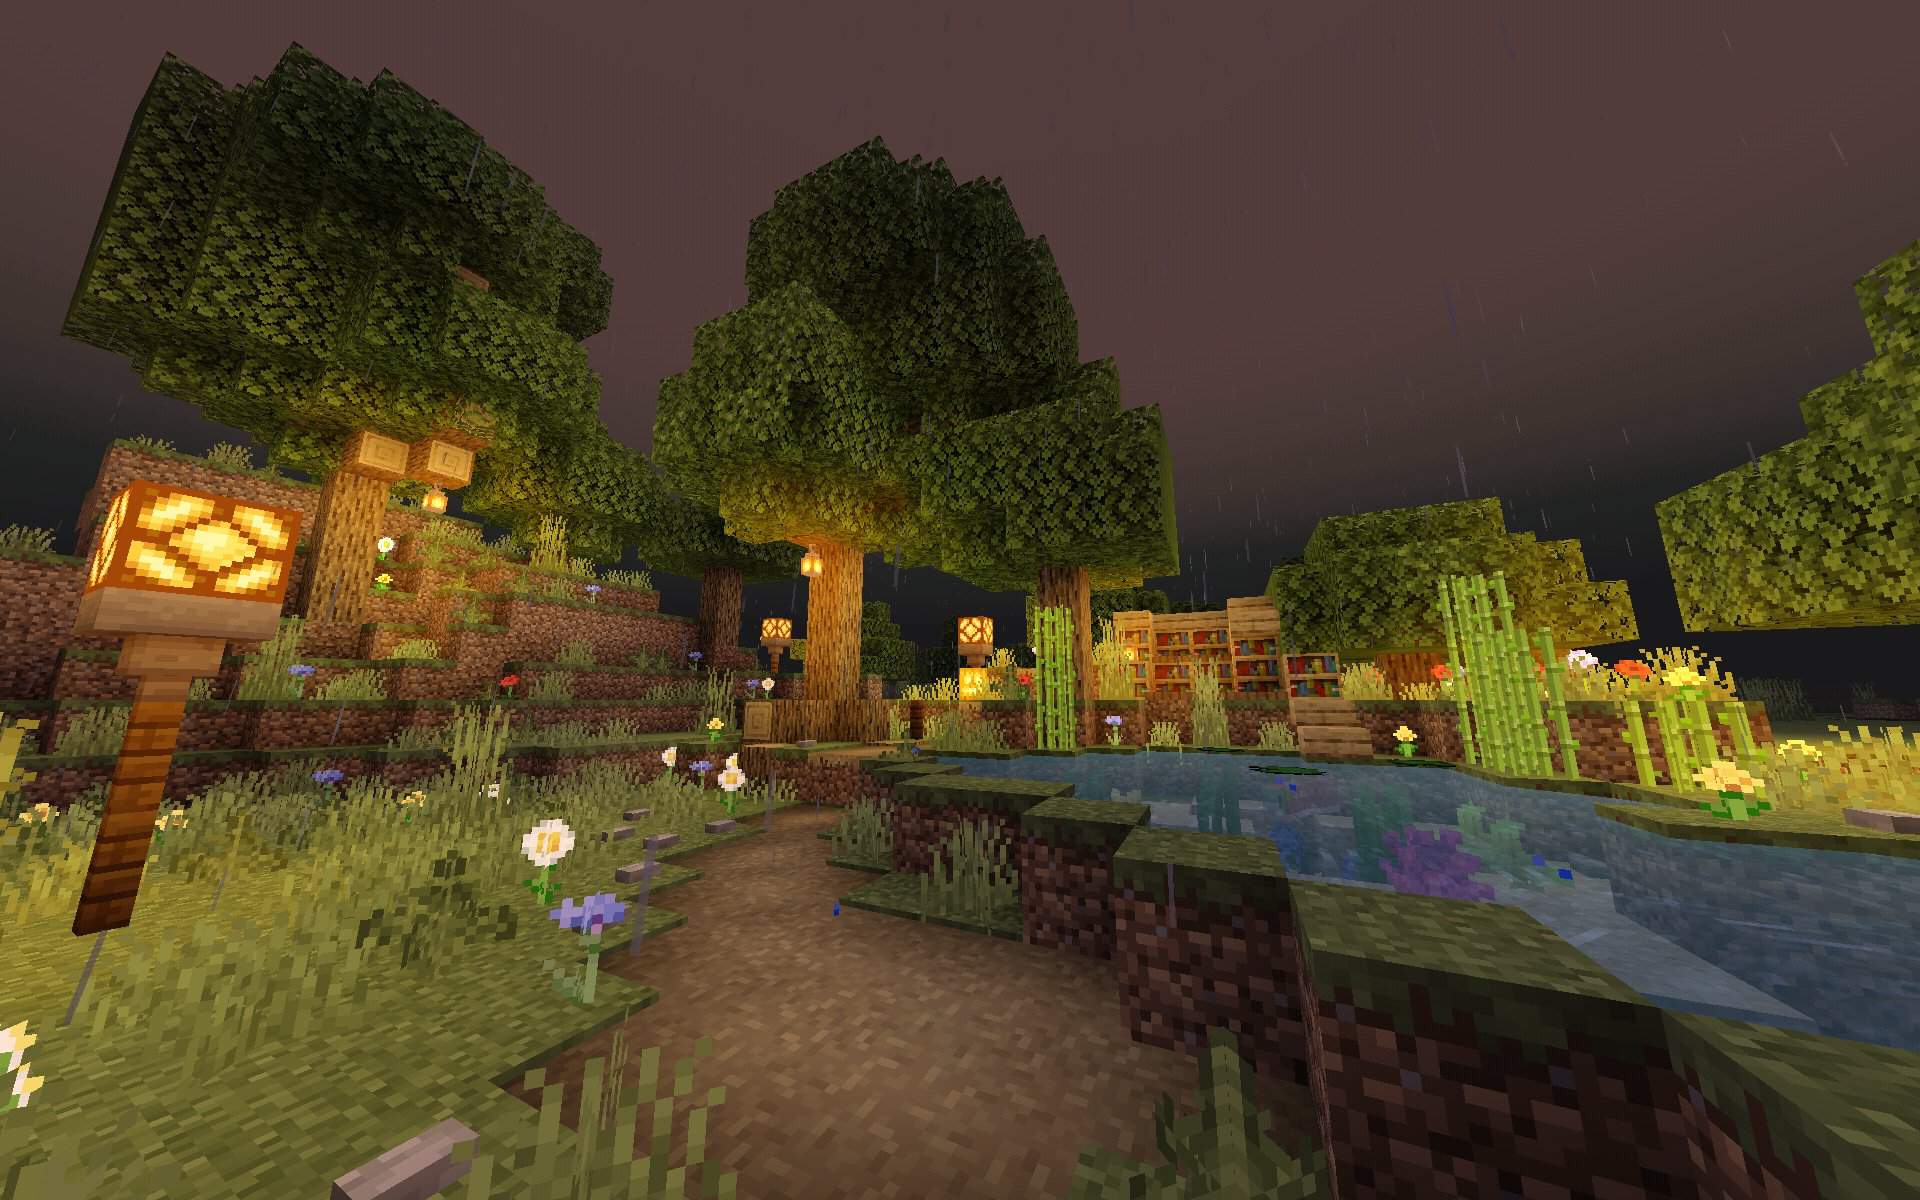 A screenshot of a Minecraft world at night, with a house built around a tree, and a pond nearby. - Minecraft